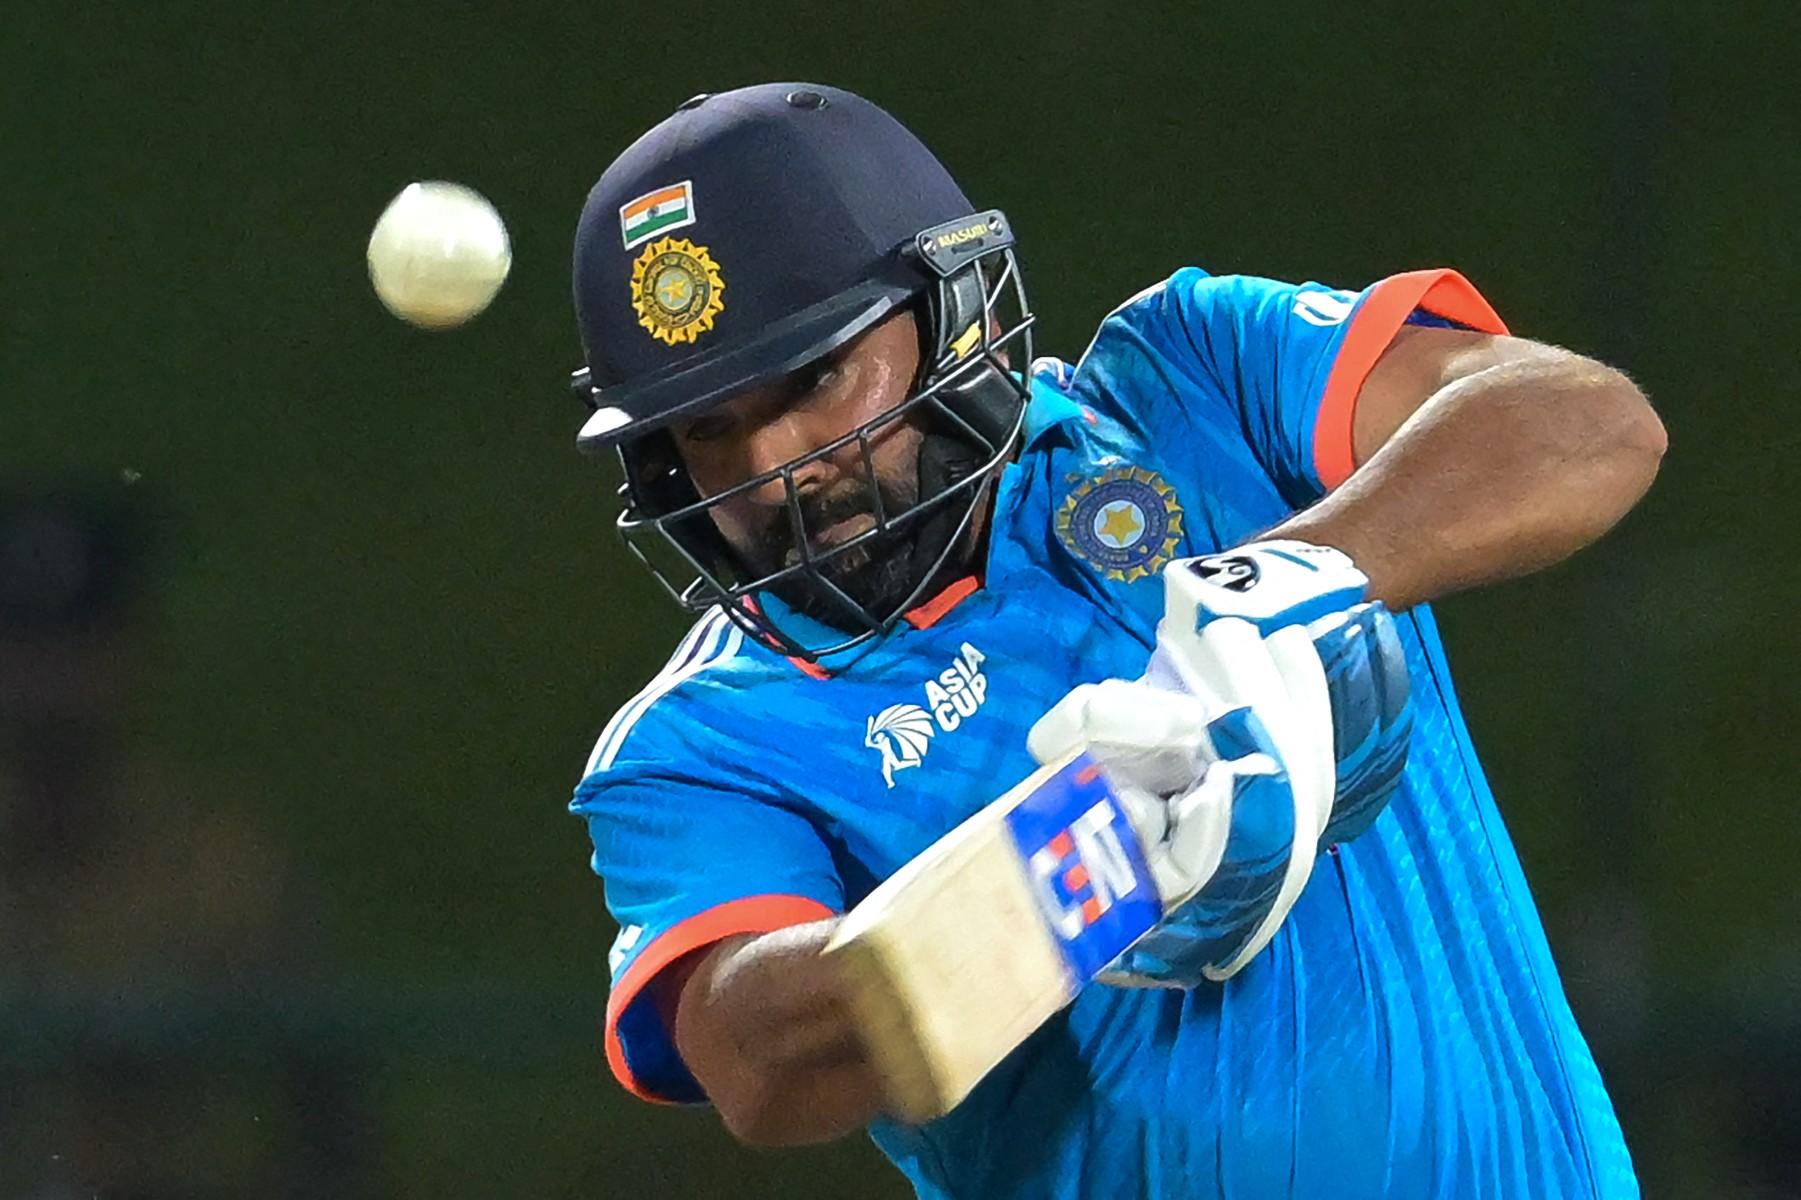 Pull shot specialist Rohit Sharma is the only player to complete 250 sixes in ODI cricket as an opener. Rohit Sharma is just 70 runs away from becoming the third Indian opener to score 13000 runs in international cricket after Sachin Tendulkar and Virender Sehwag